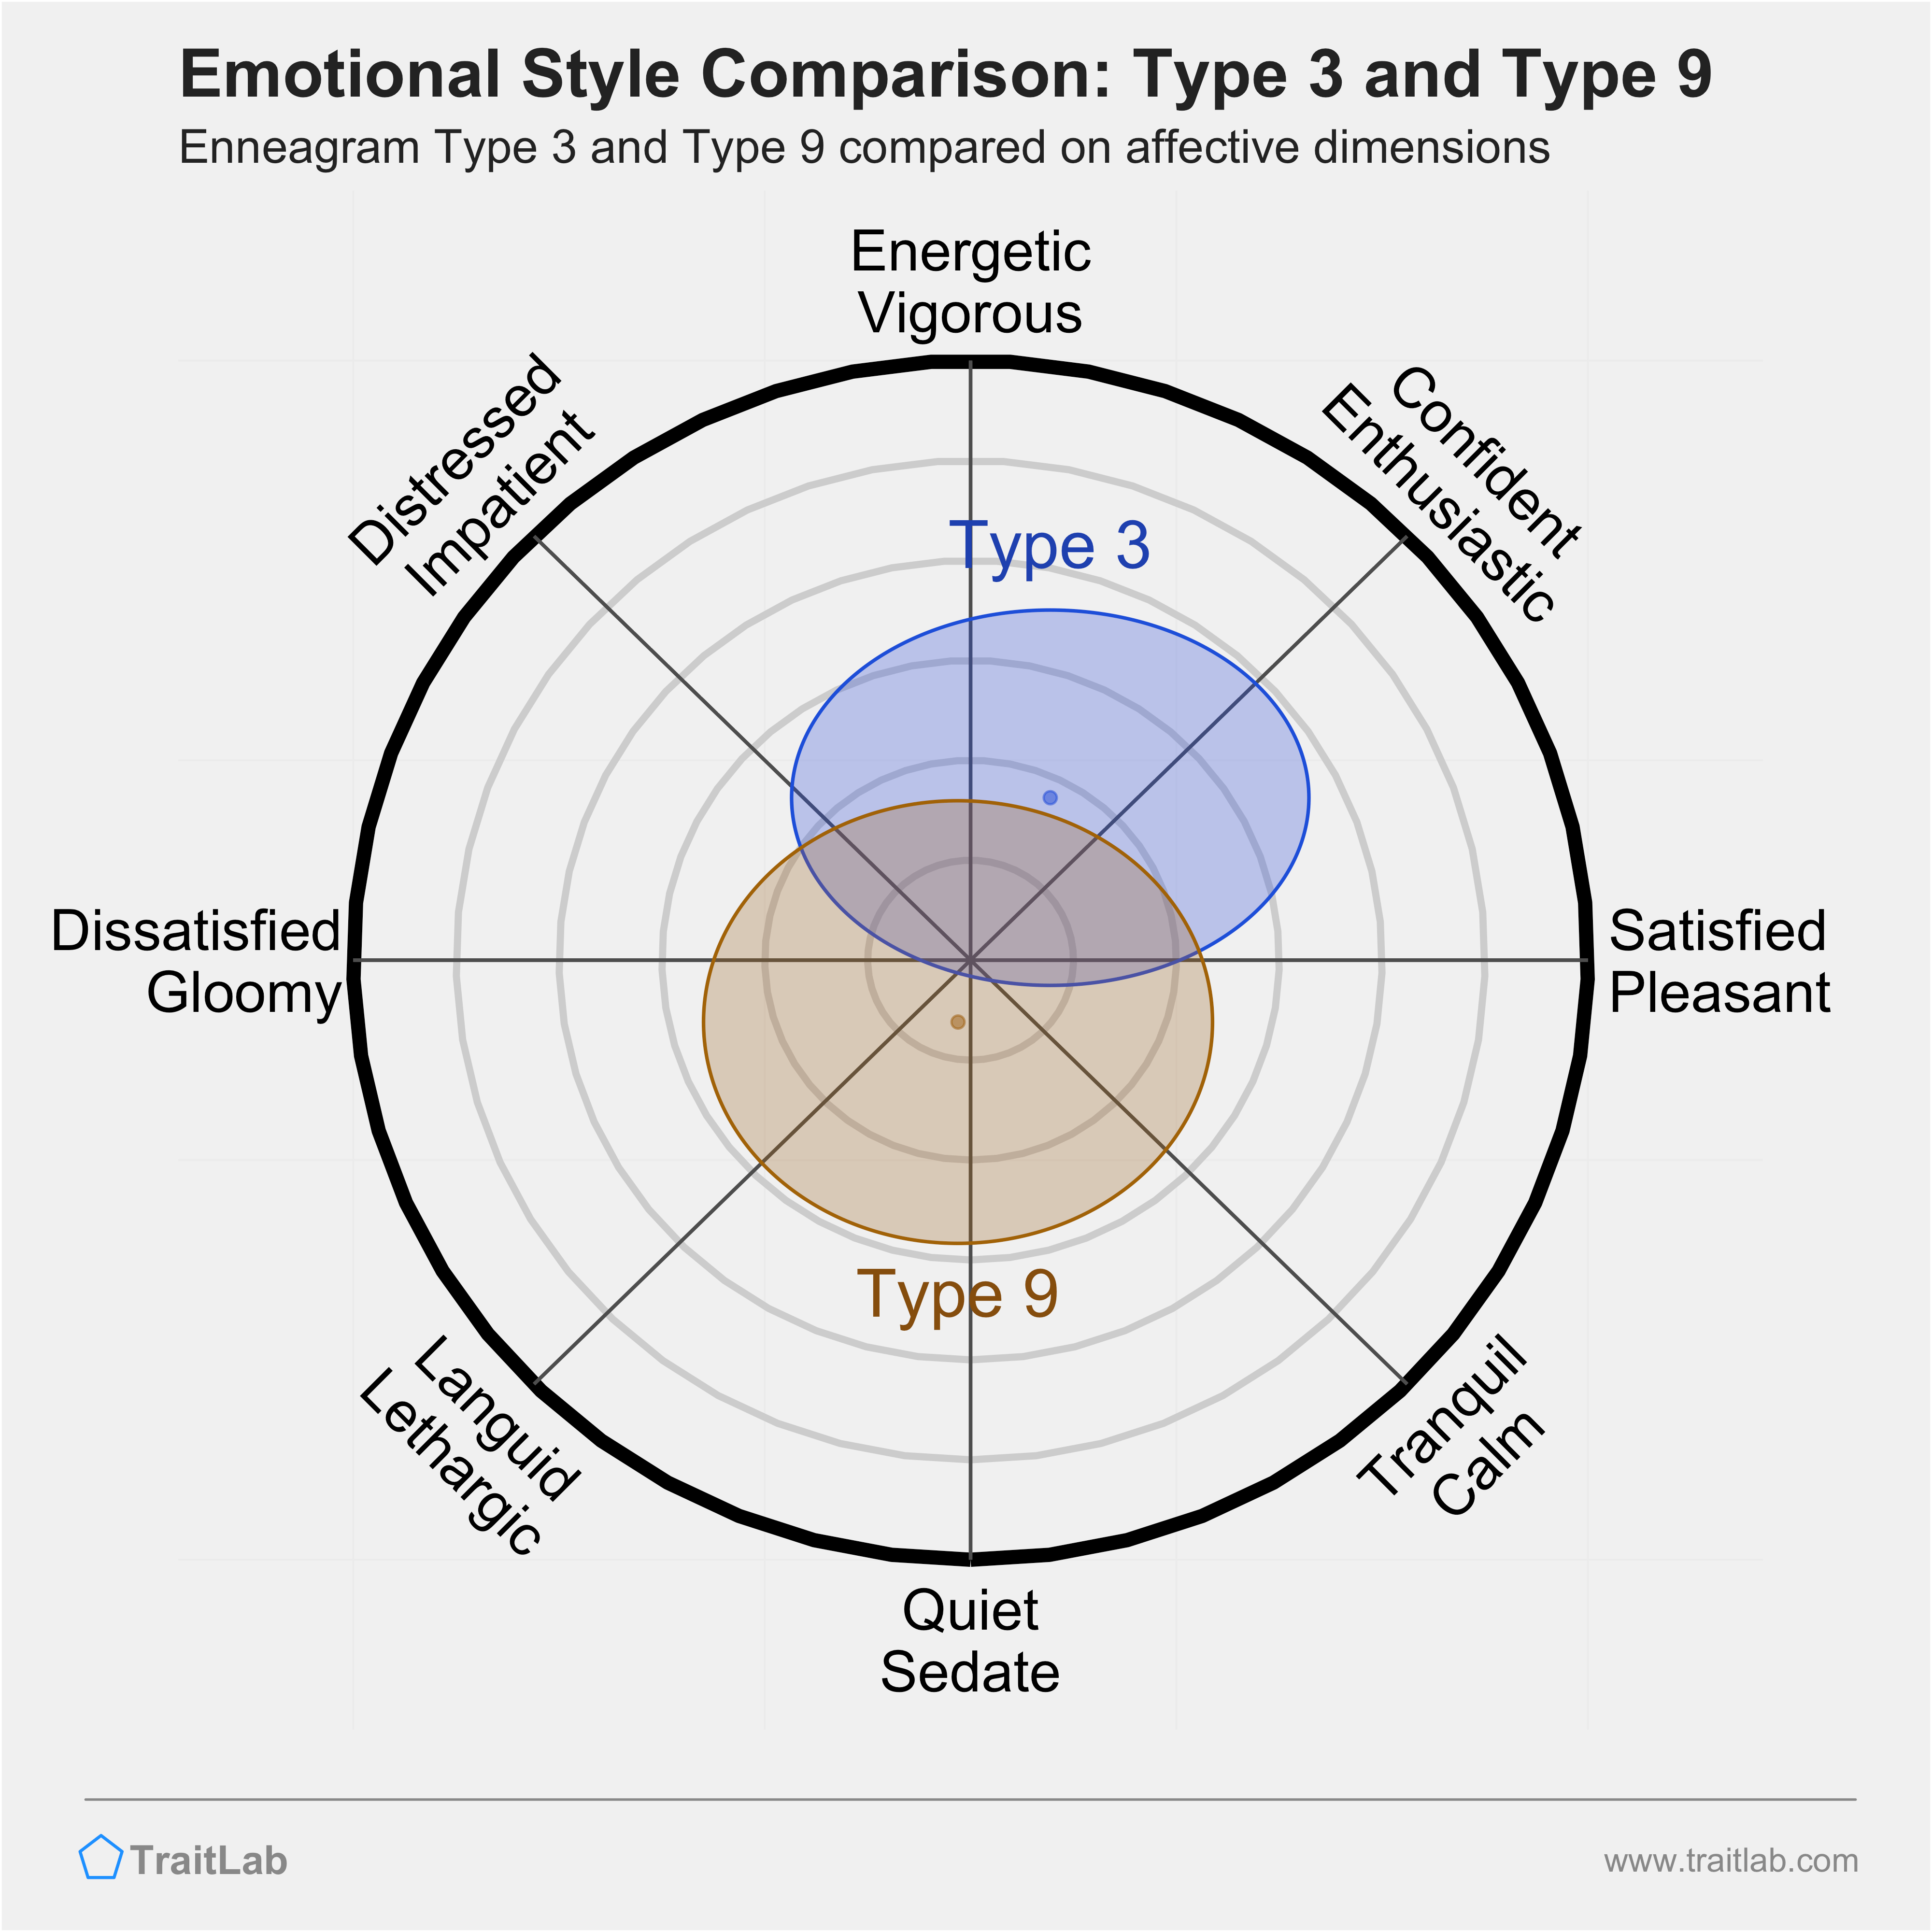 Type 3 and Type 9 comparison across emotional (affective) dimensions